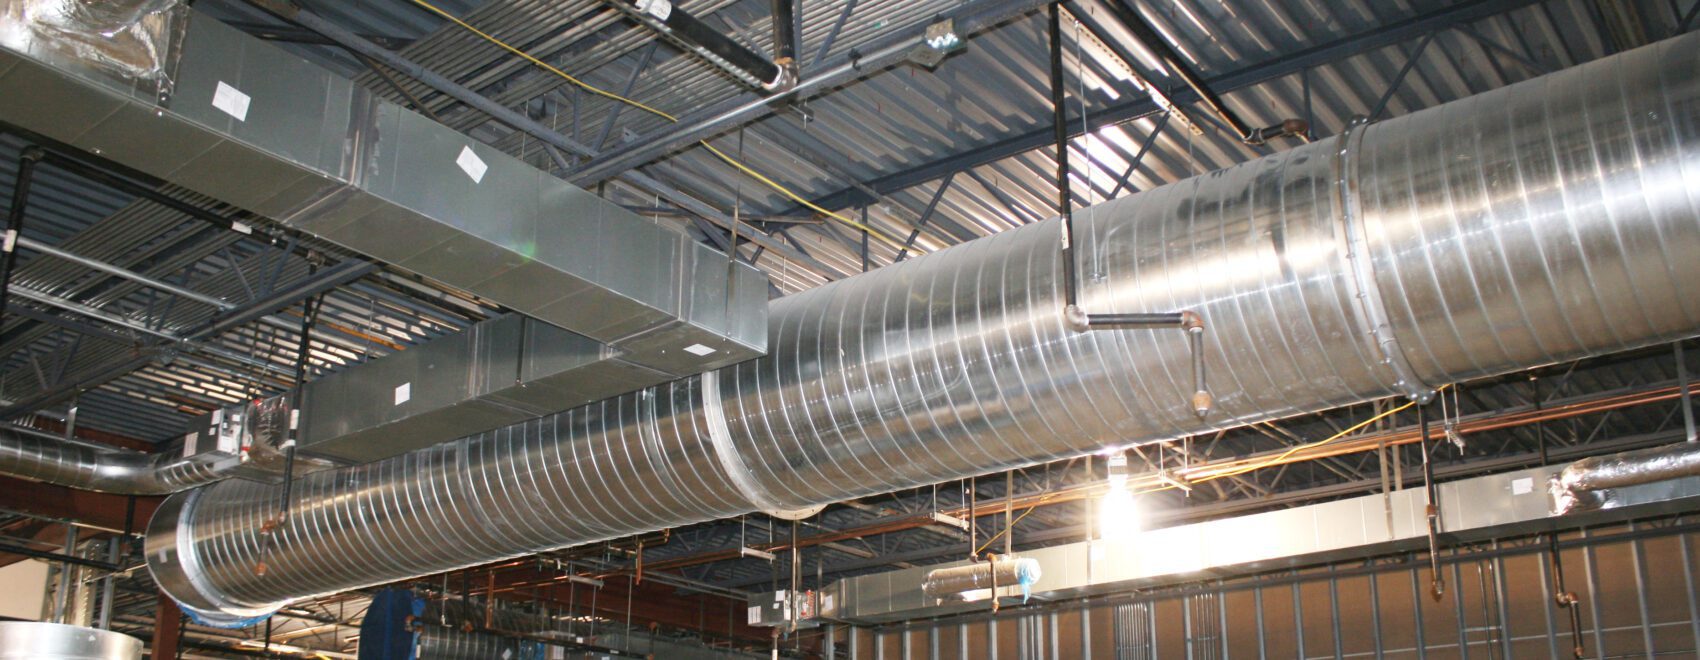 HVAC Commercial and Ducting